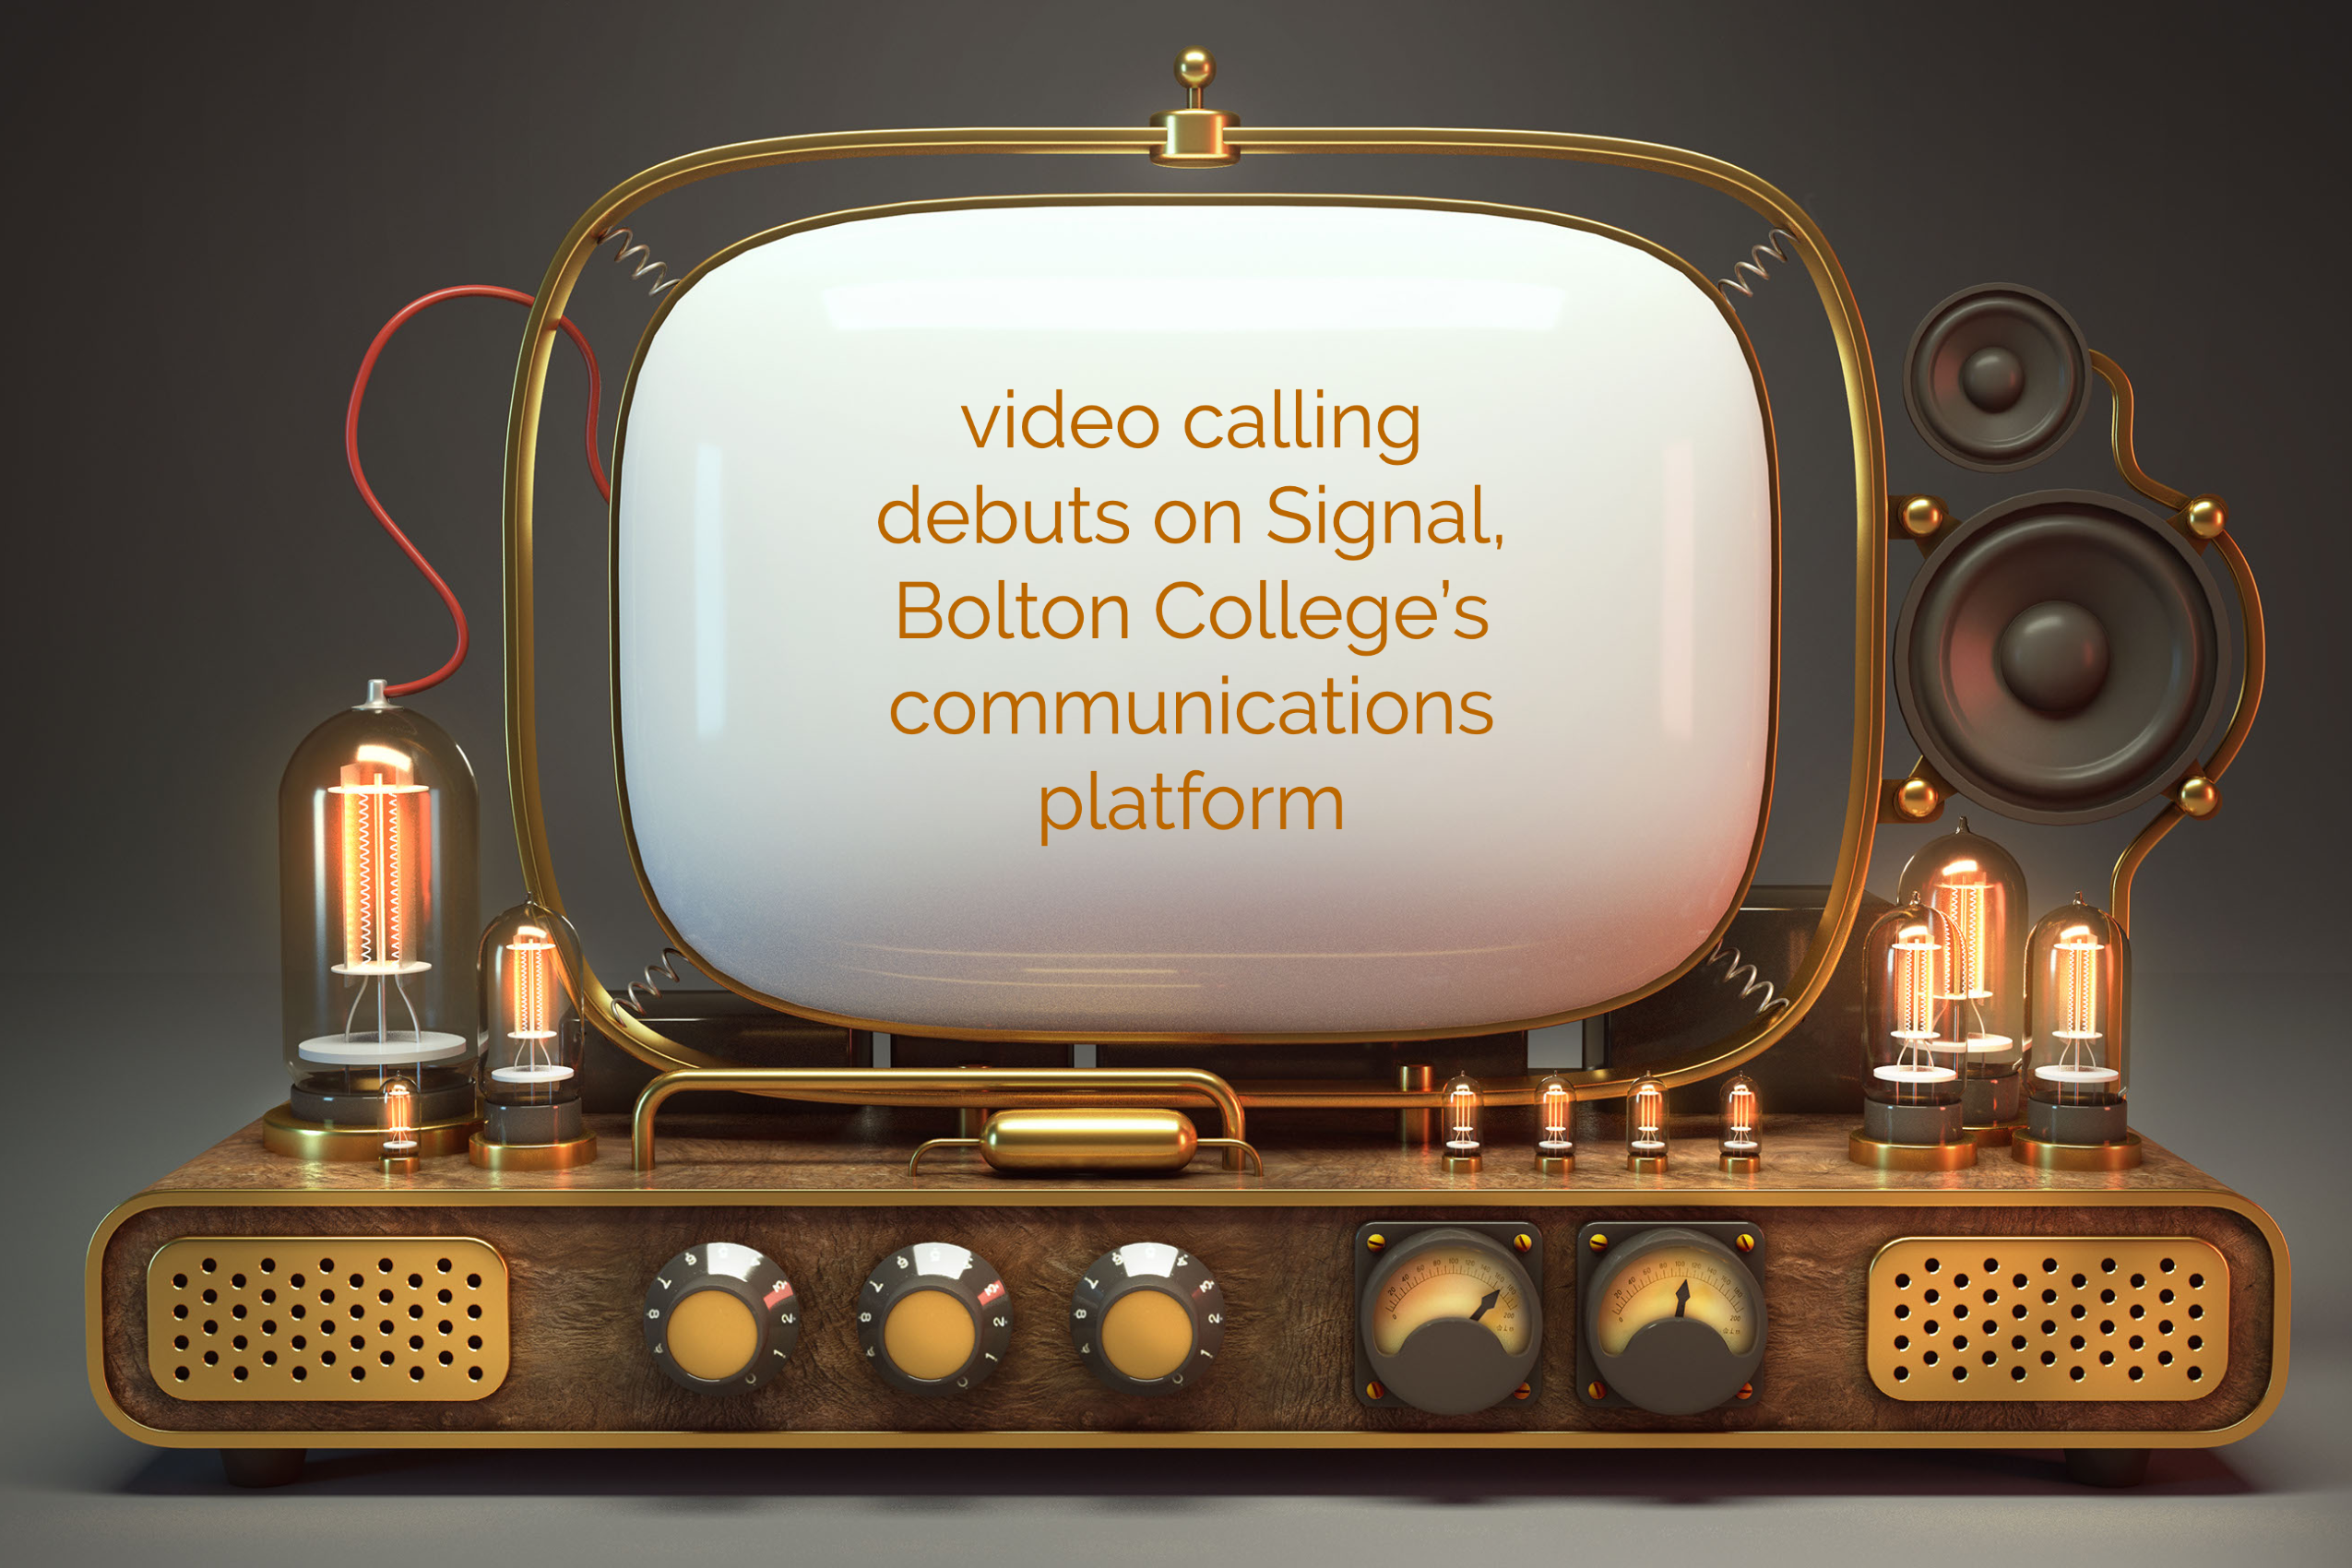 Video calls make their debut in Signal